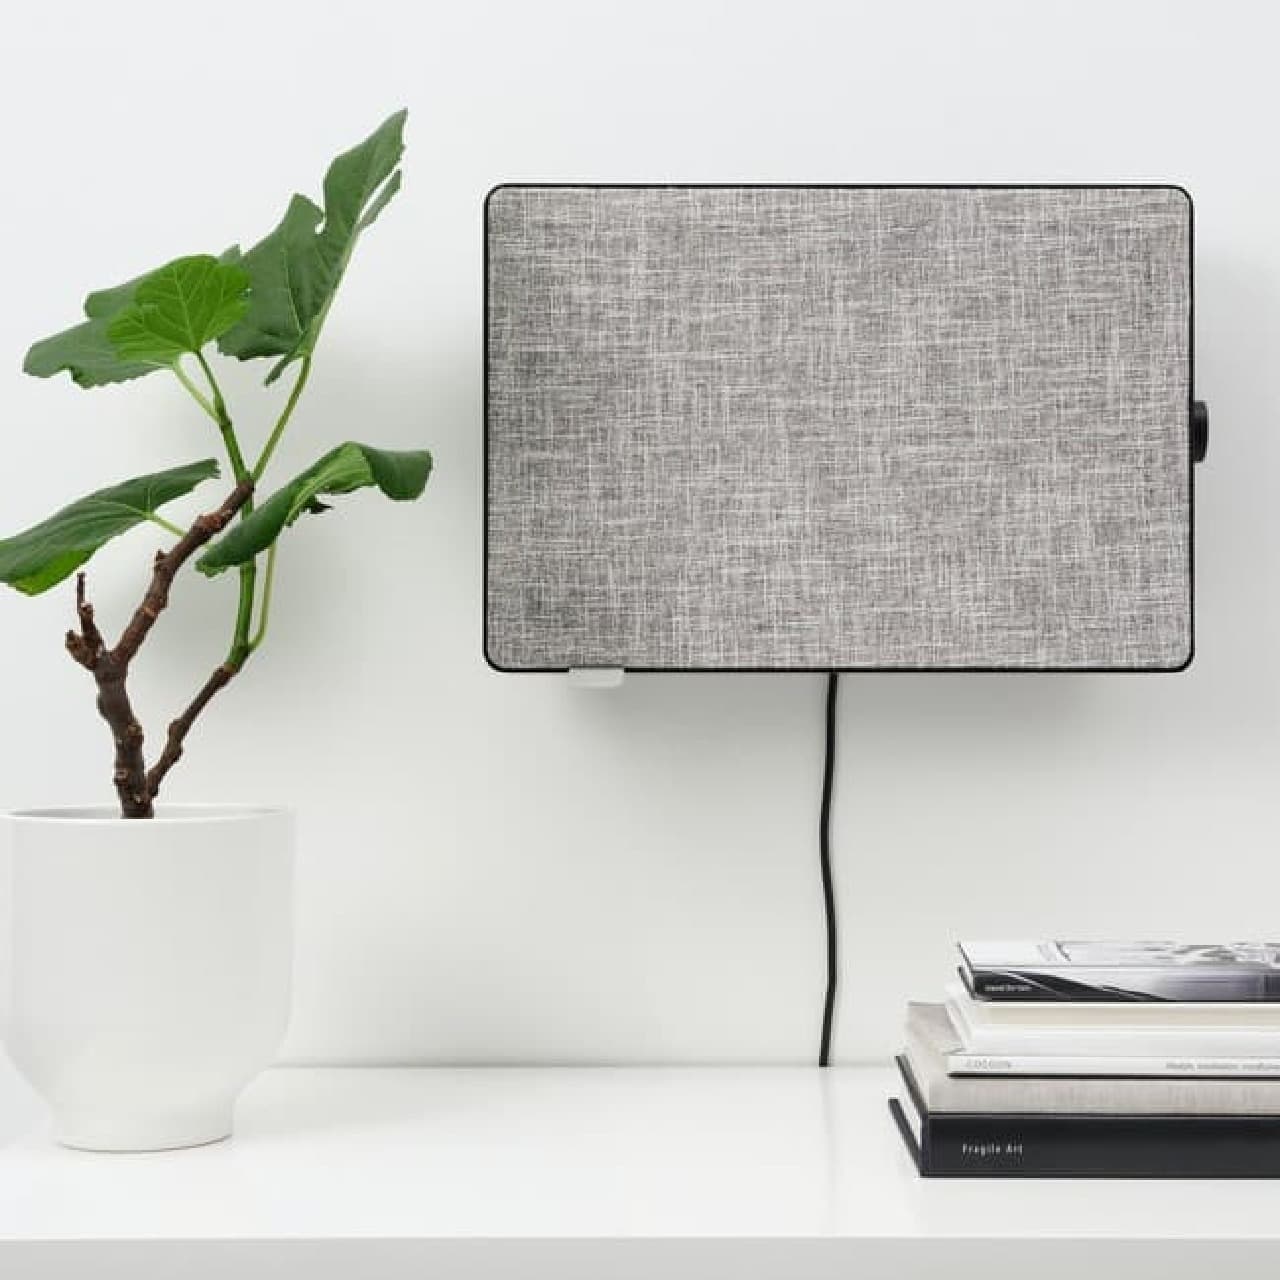 From "Forneuftig Air Purifier" IKEA --Wall hanging OK! Design that harmonizes with the room